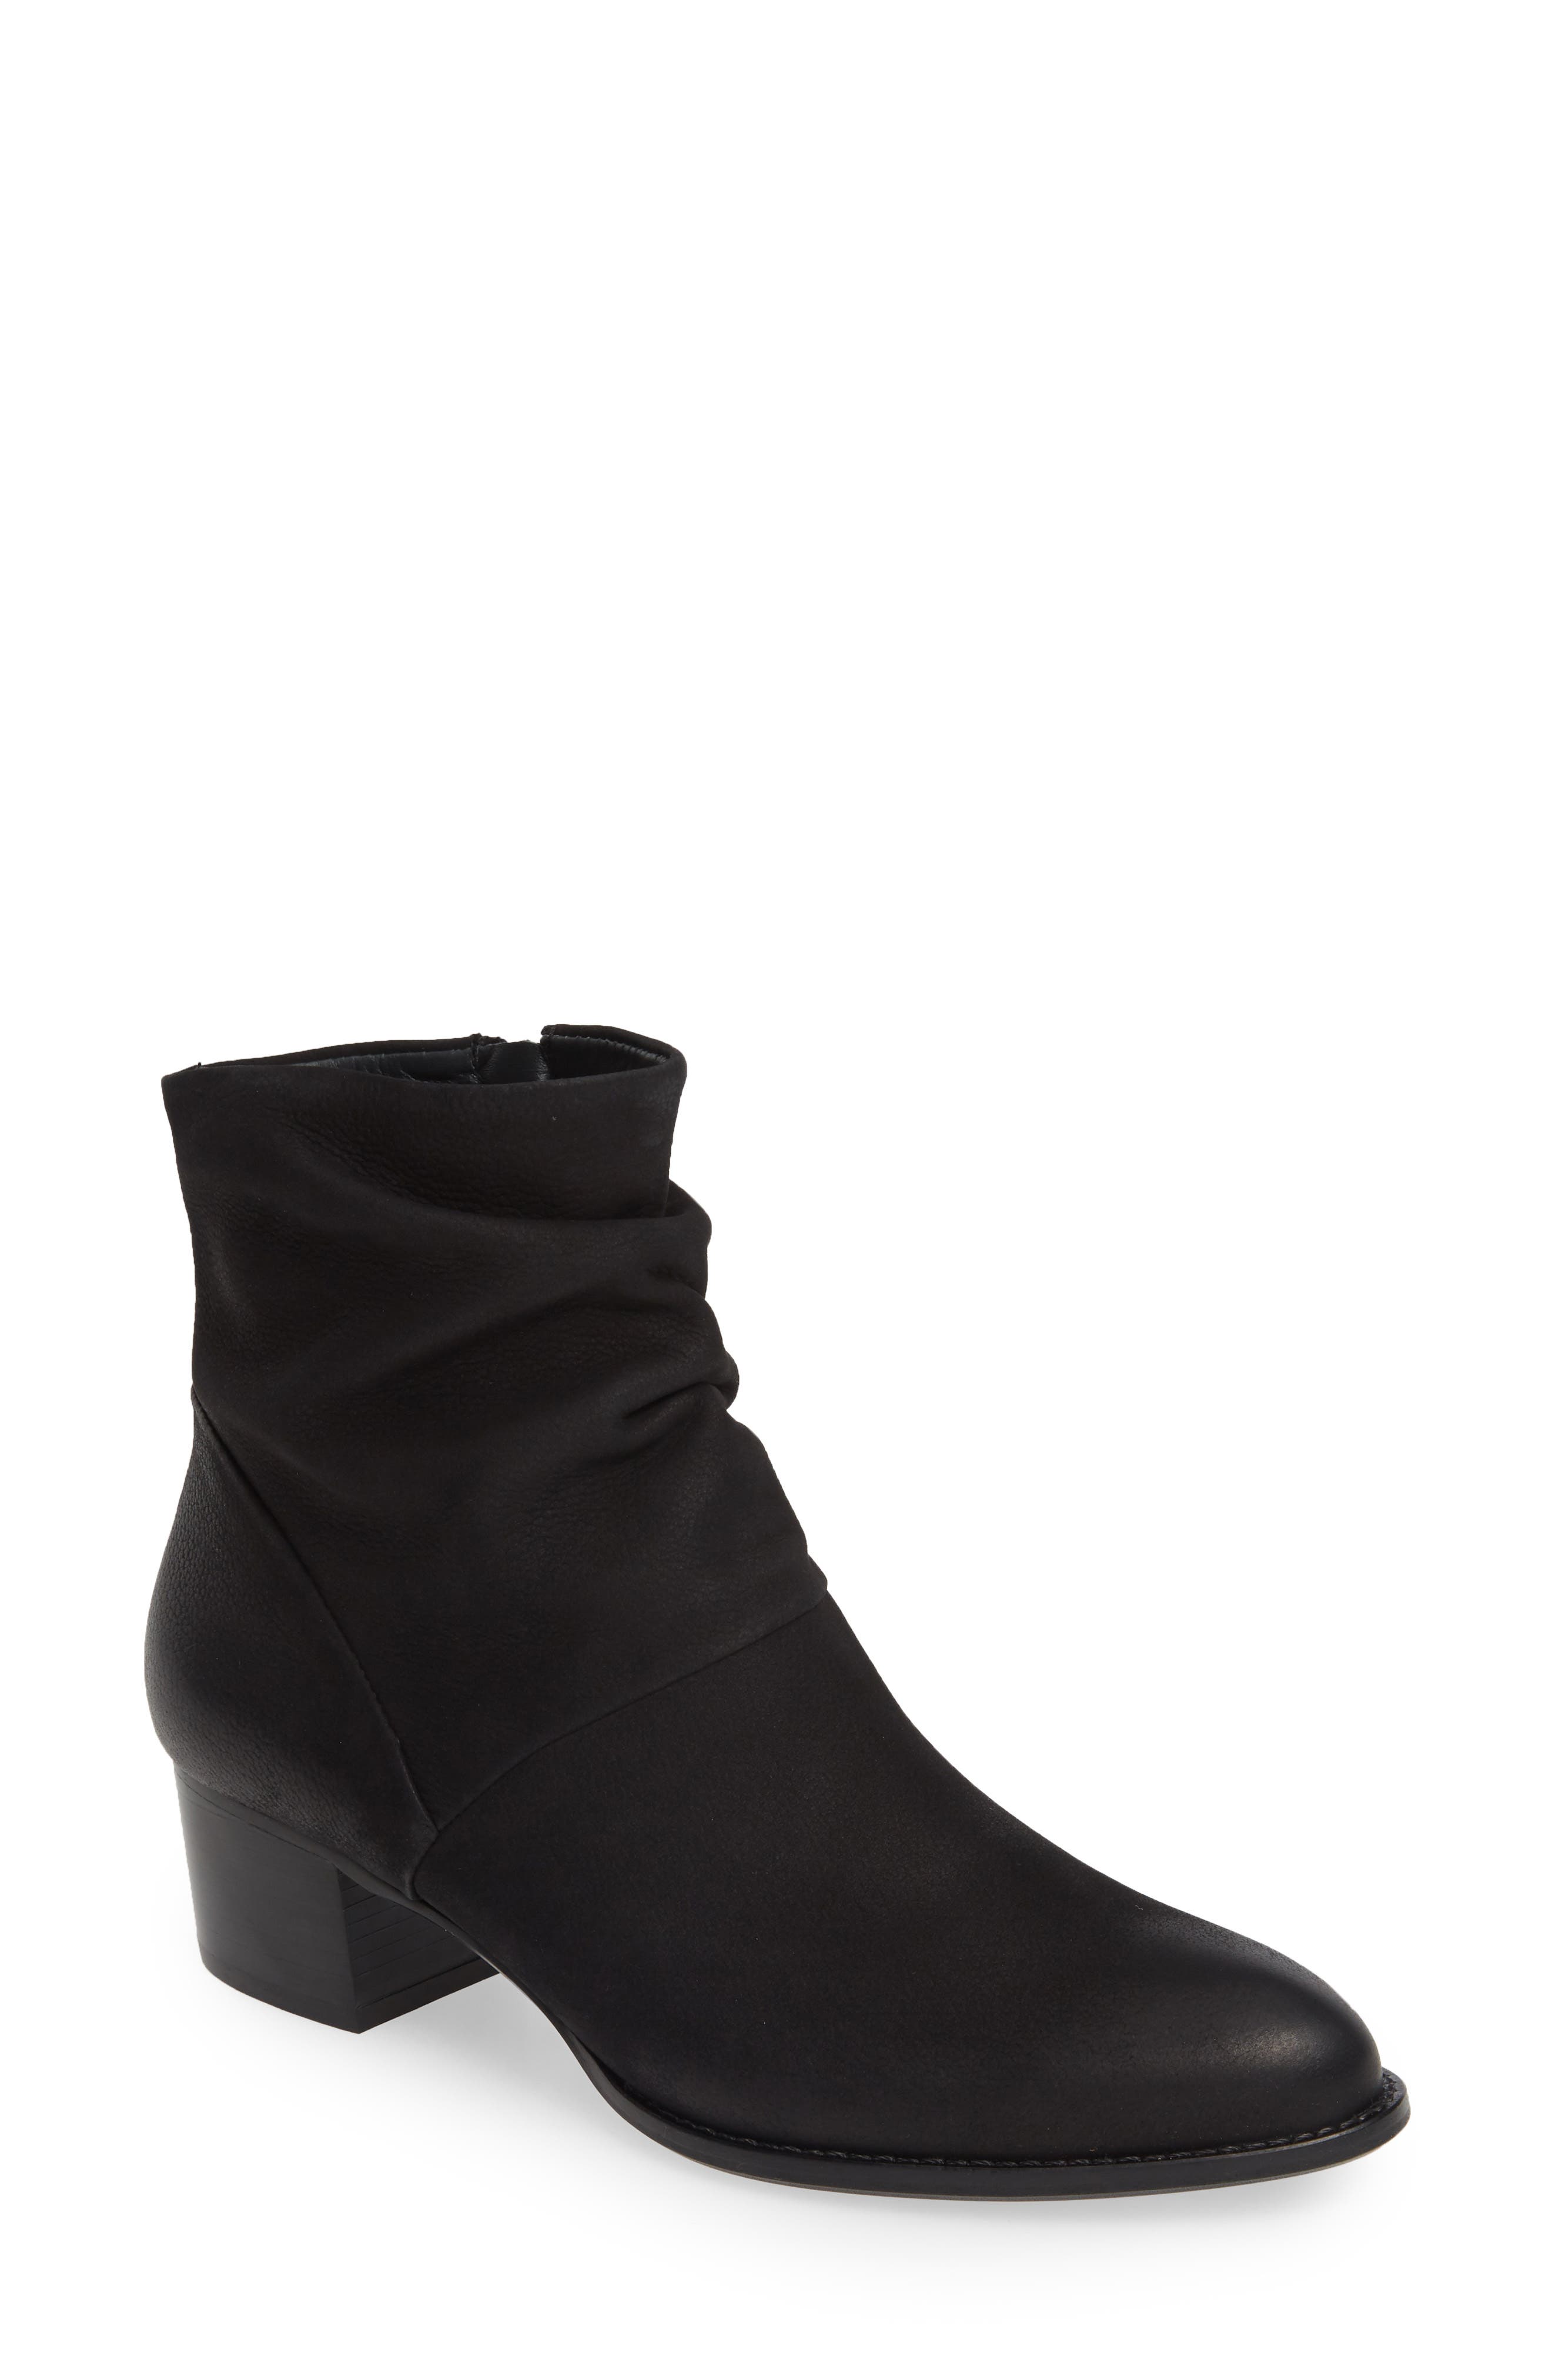 Paul Green | Brianna Slouchy Bootie 